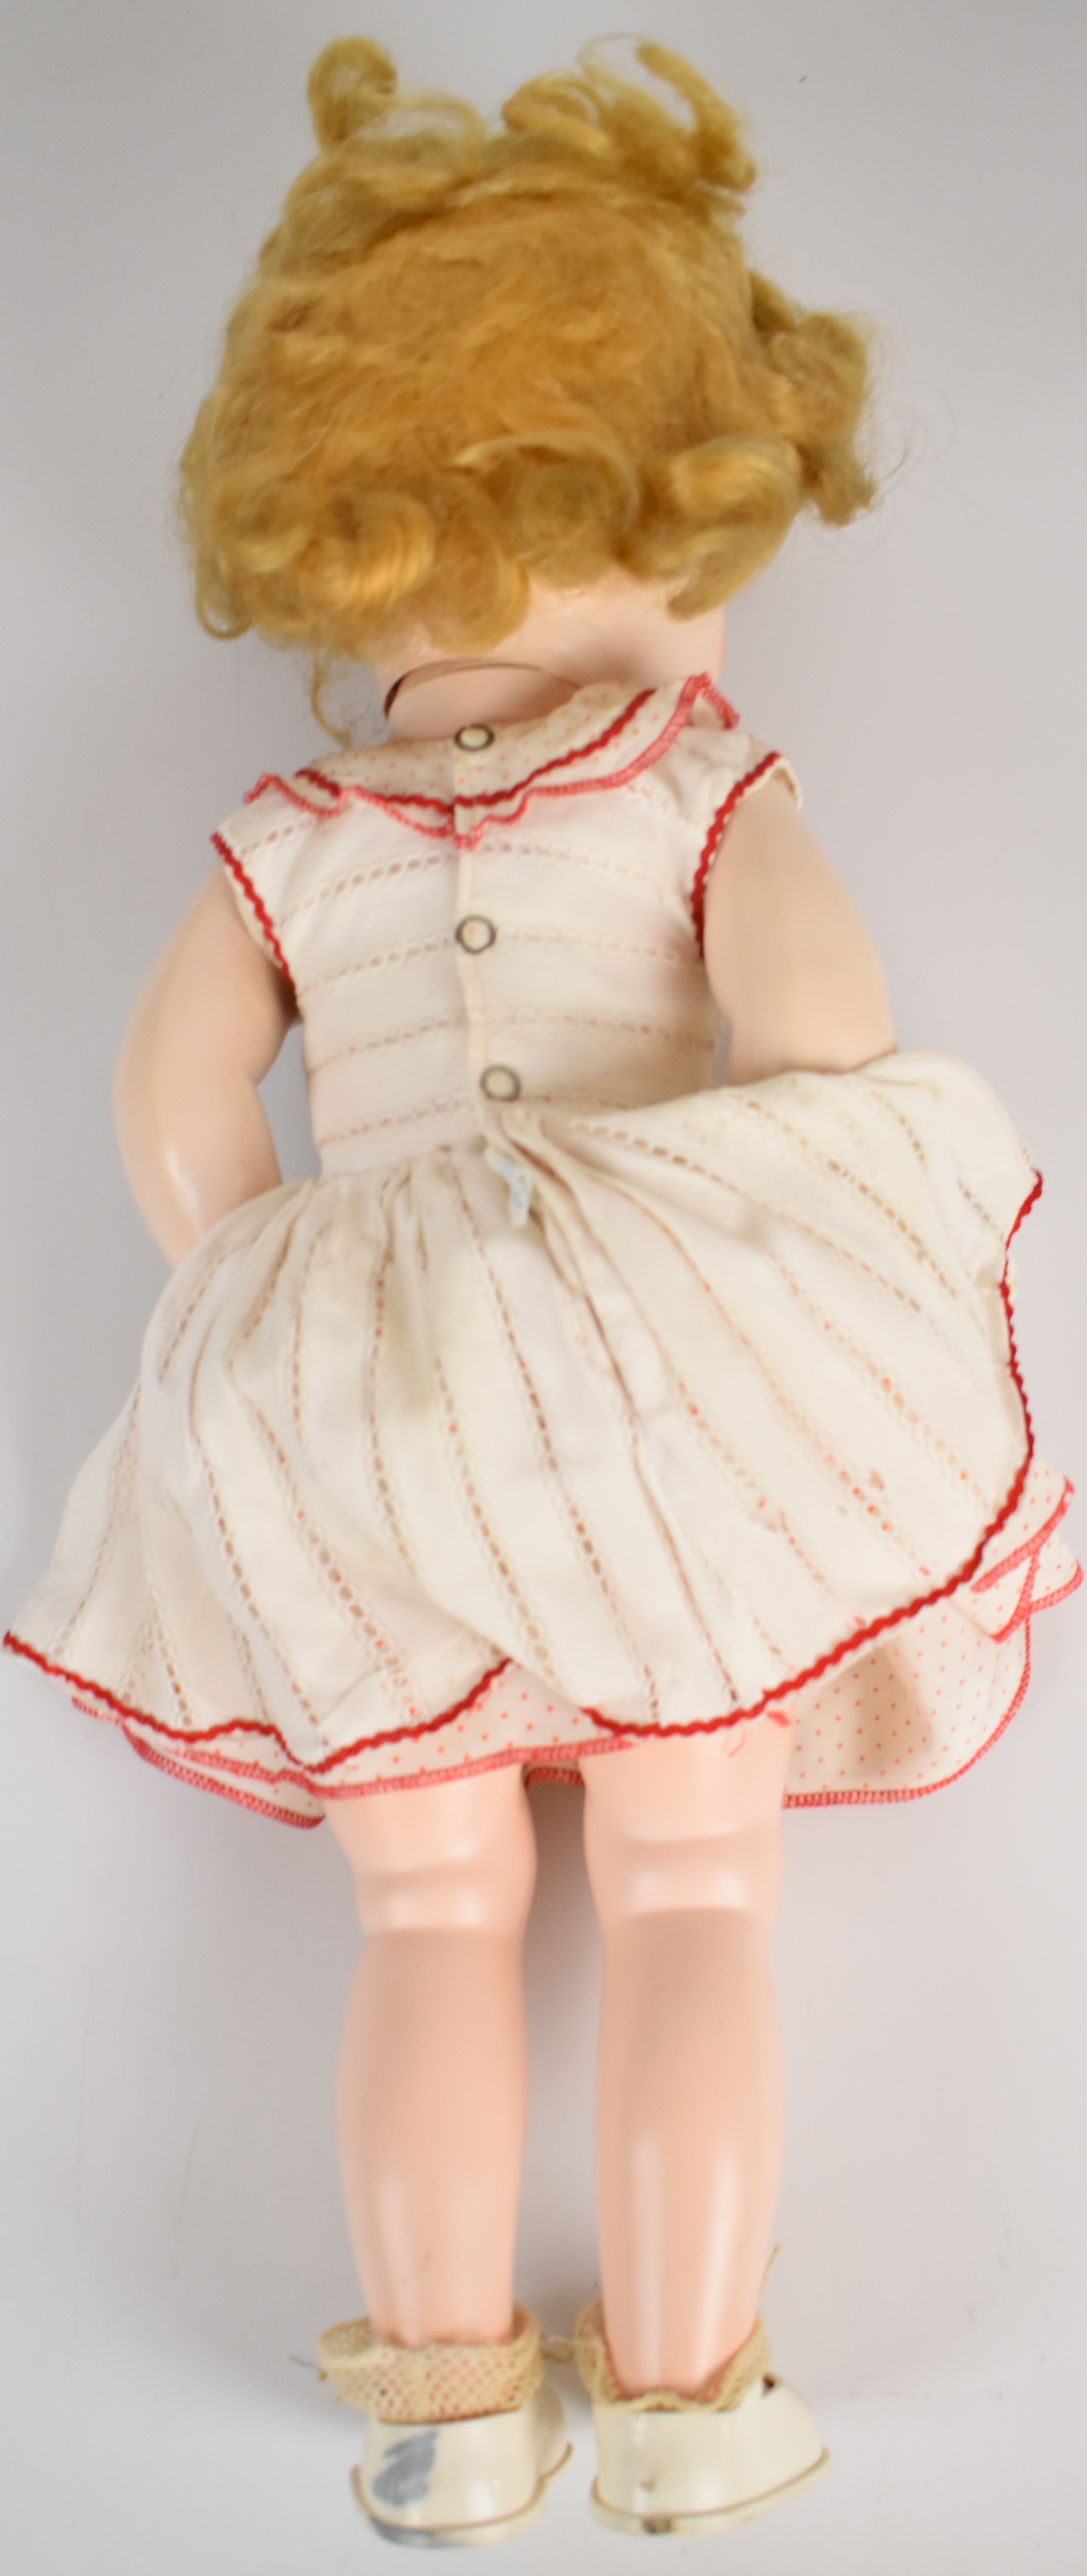 Pedigree plastic bodied doll with blonde hair, blue weighted eyes, red lips and tinted cheeks, - Image 2 of 3